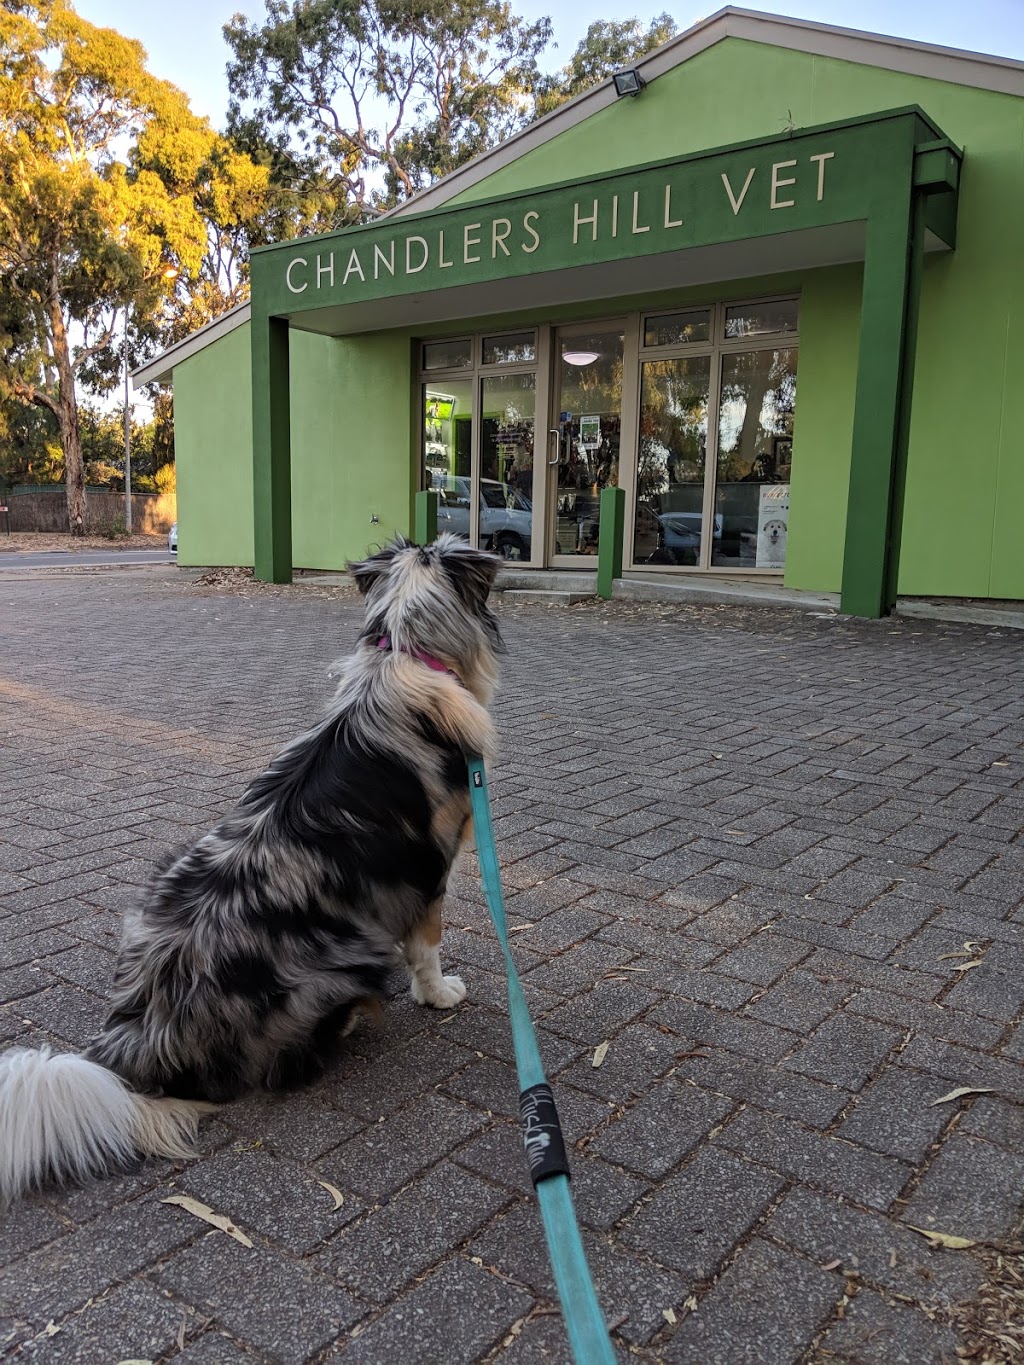 Chandlers Hill Vet | 190 Chandlers Hill Rd, Happy Valley SA 5159, Australia | Phone: (08) 8322 2090